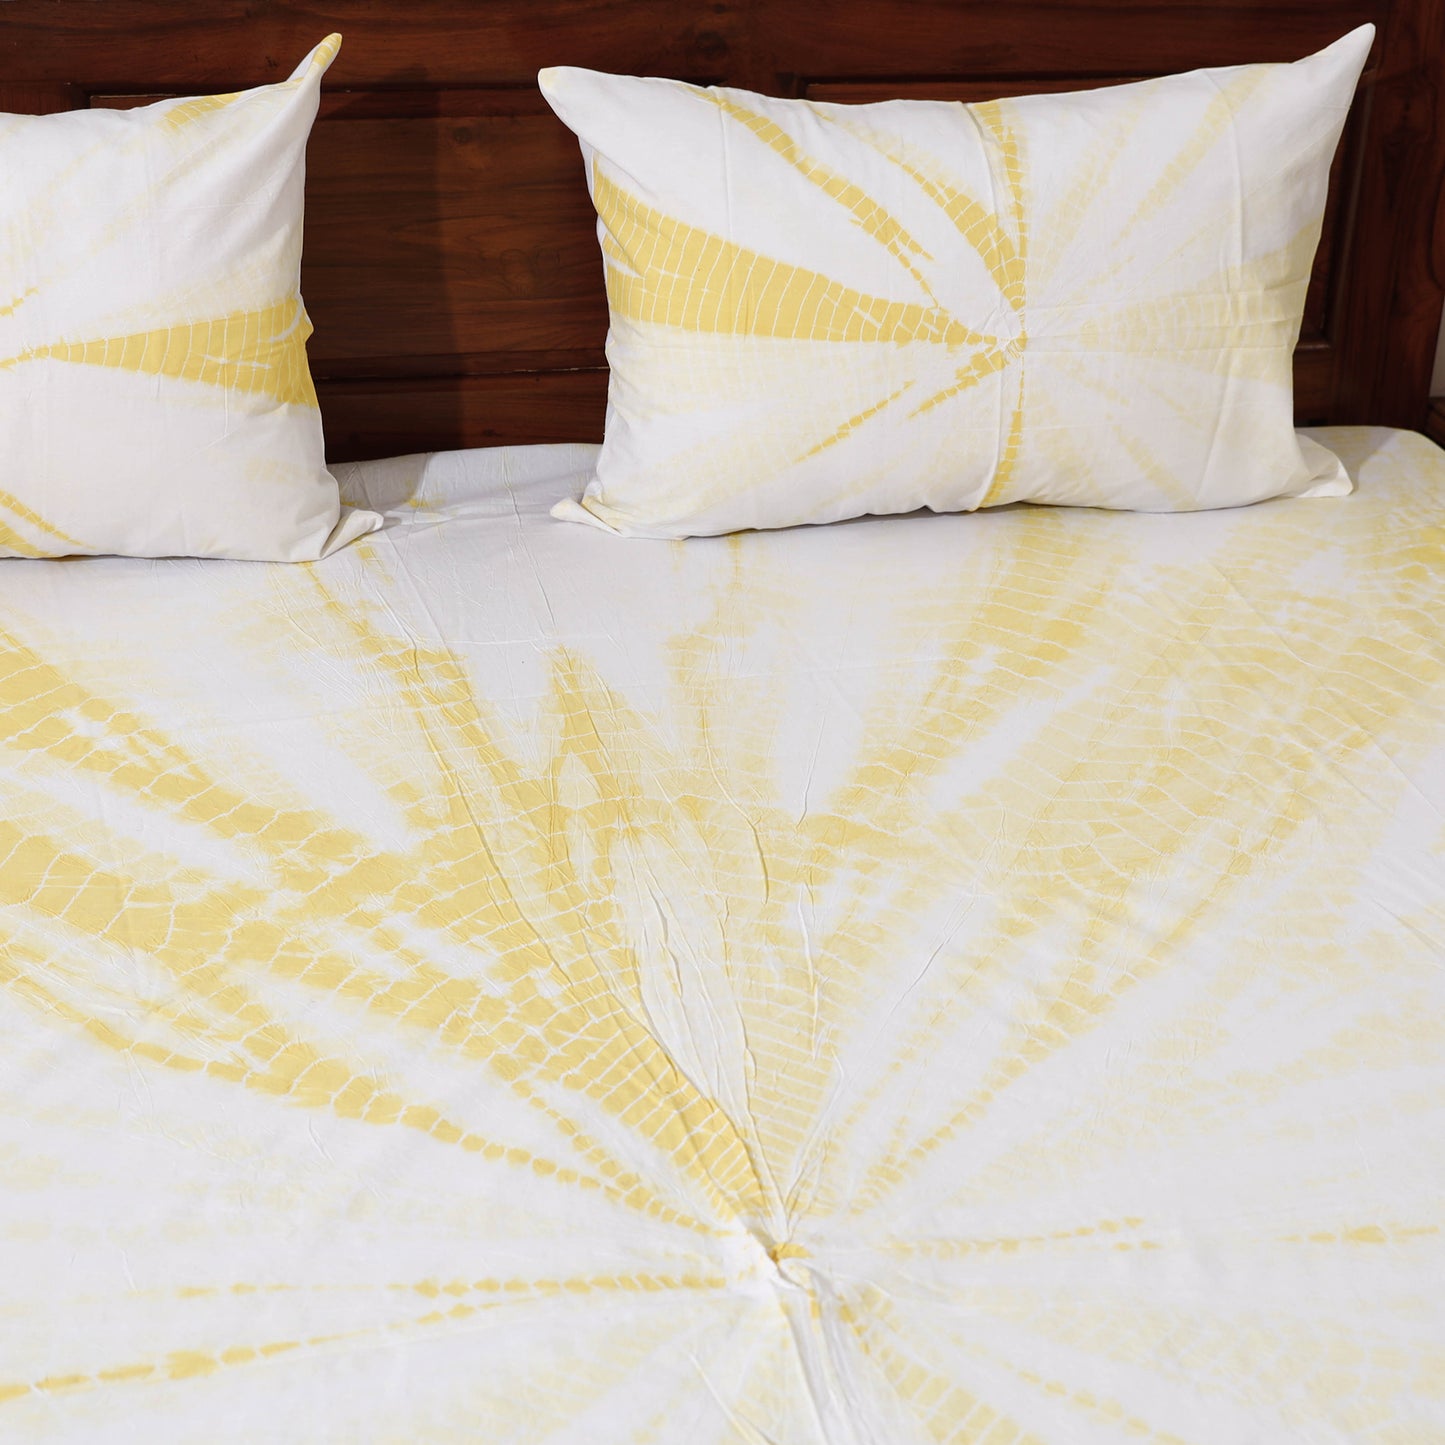 White - Shibori Tie-Dye Cotton Double Bed Cover with Pillow Covers (108 in x 90 in)